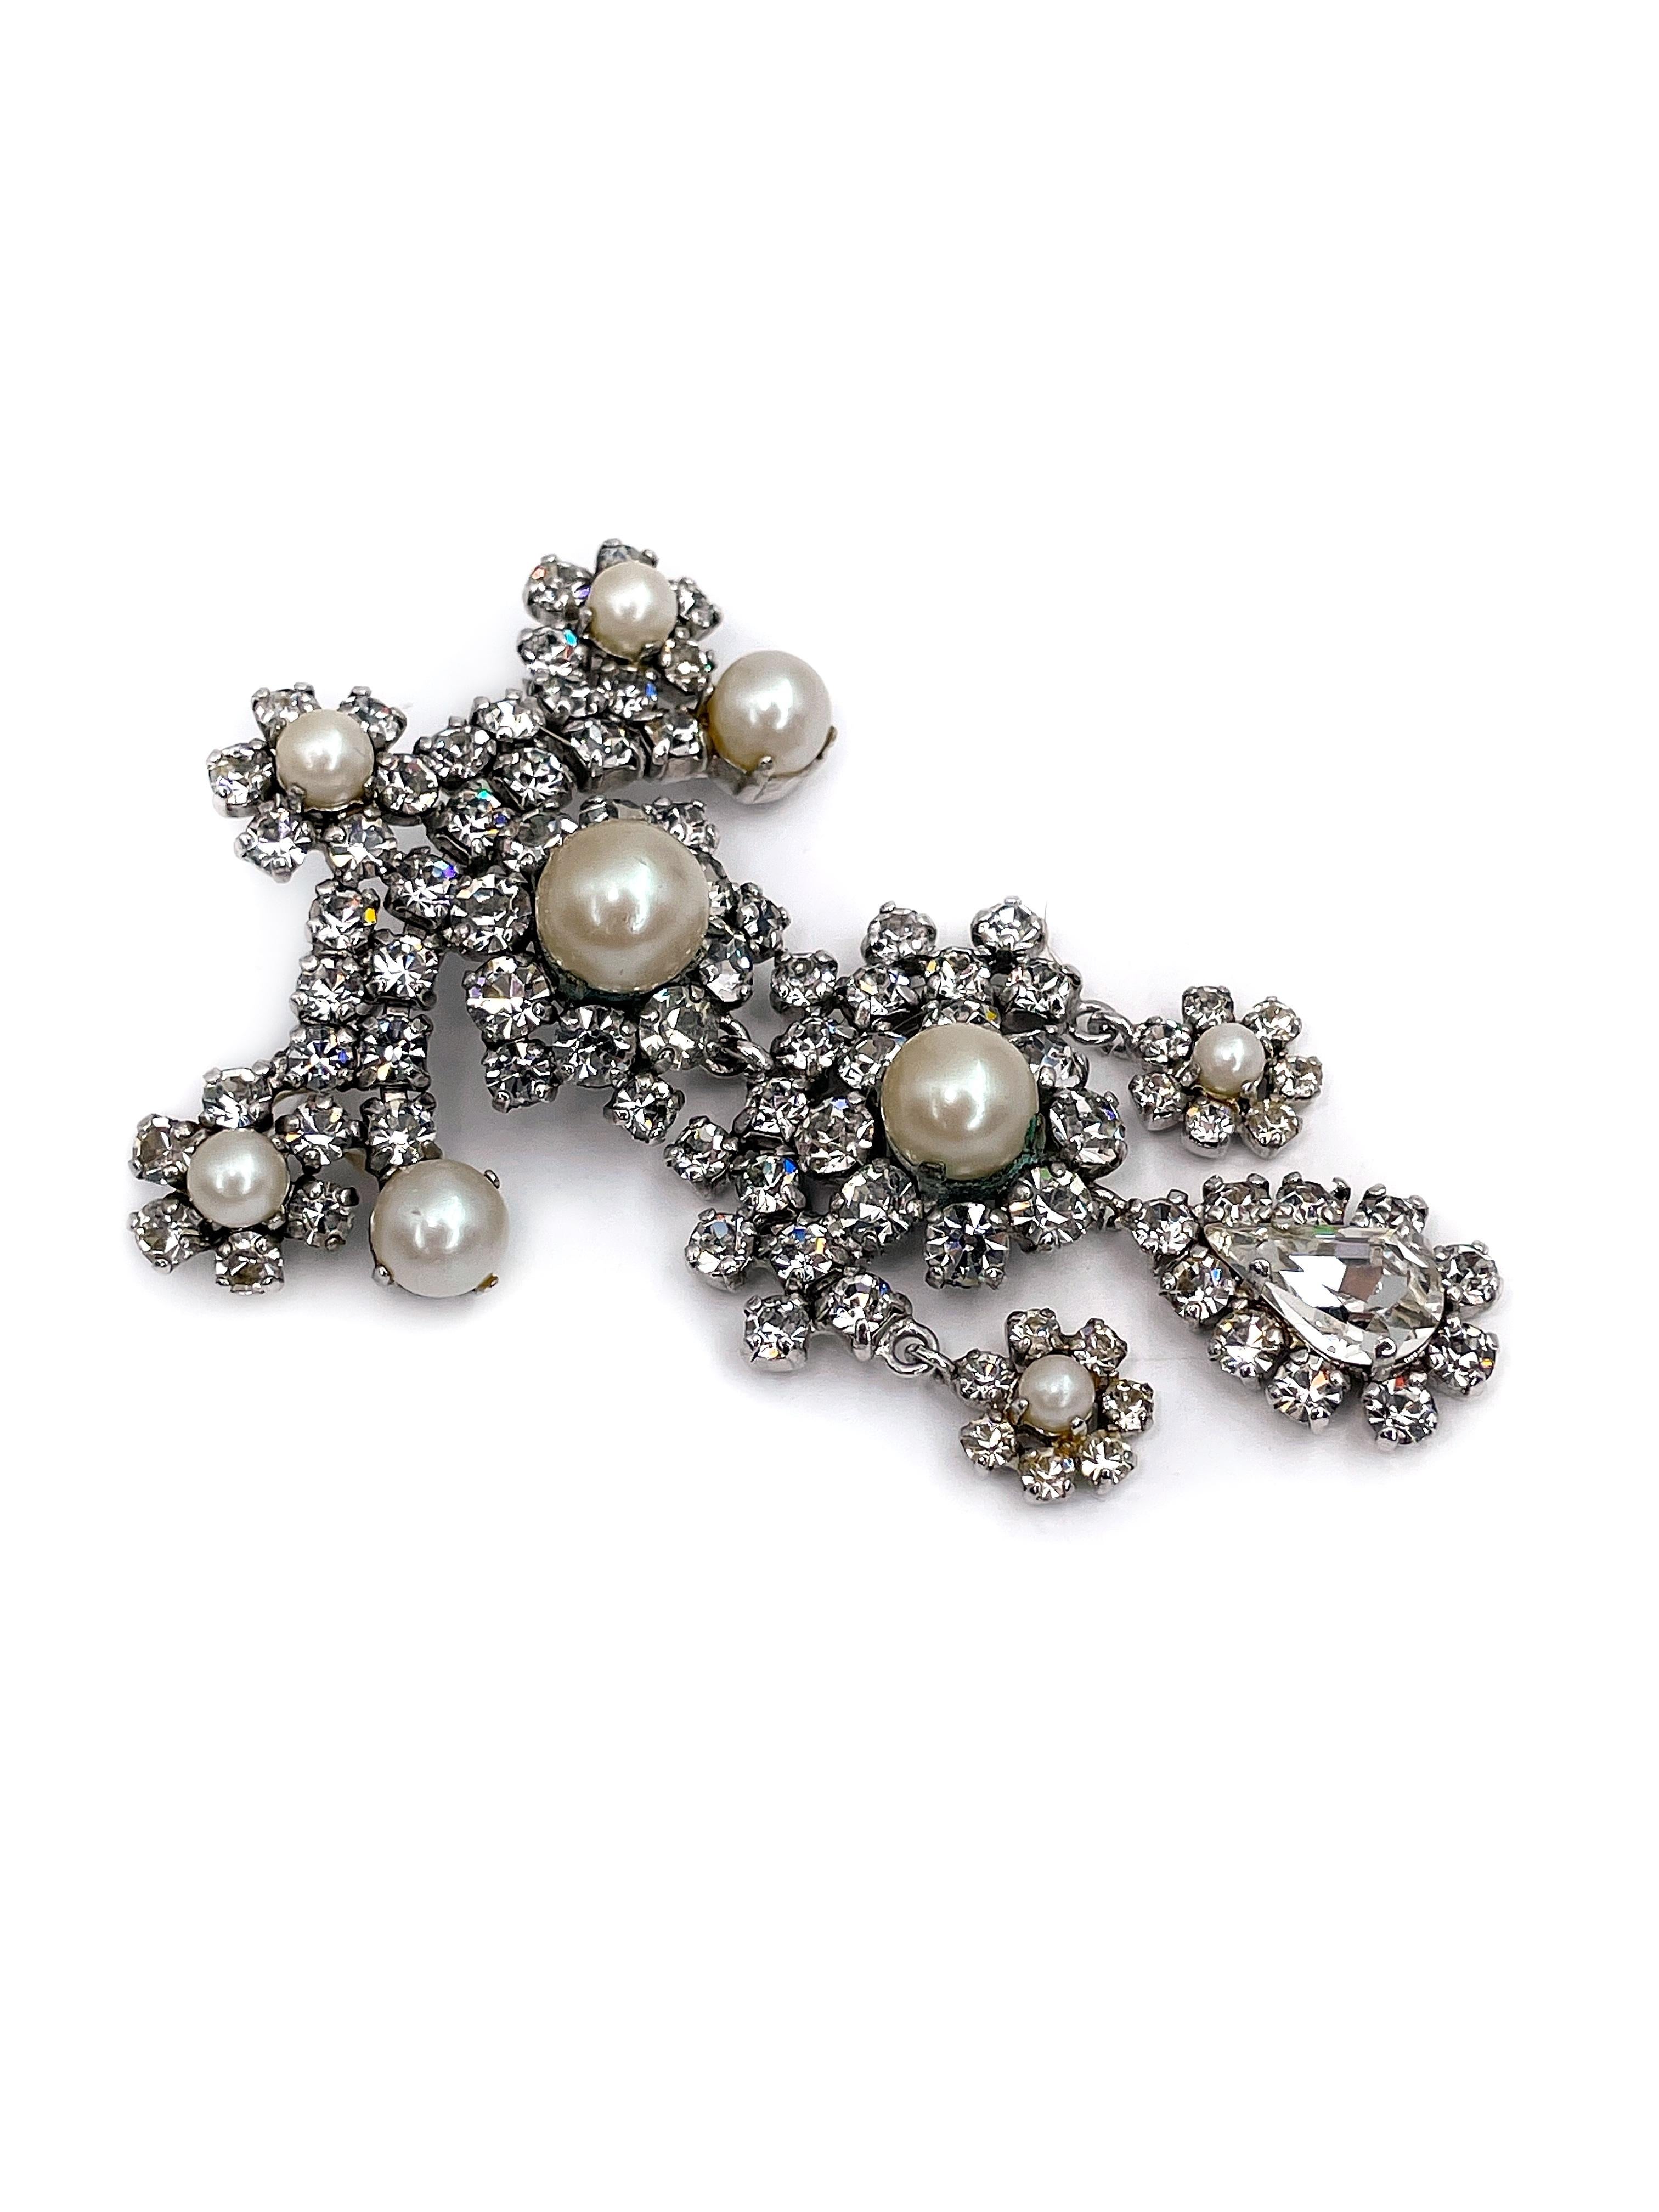 This is a magnificently sparkling silver tone chandelier pin brooch designed by Christian Dior in 1965. This piece is silver plated, adorned with faux pearls and clear shiny rhinestones.

Signature: “1965 - Chr. Dior © - Germany” (shown in